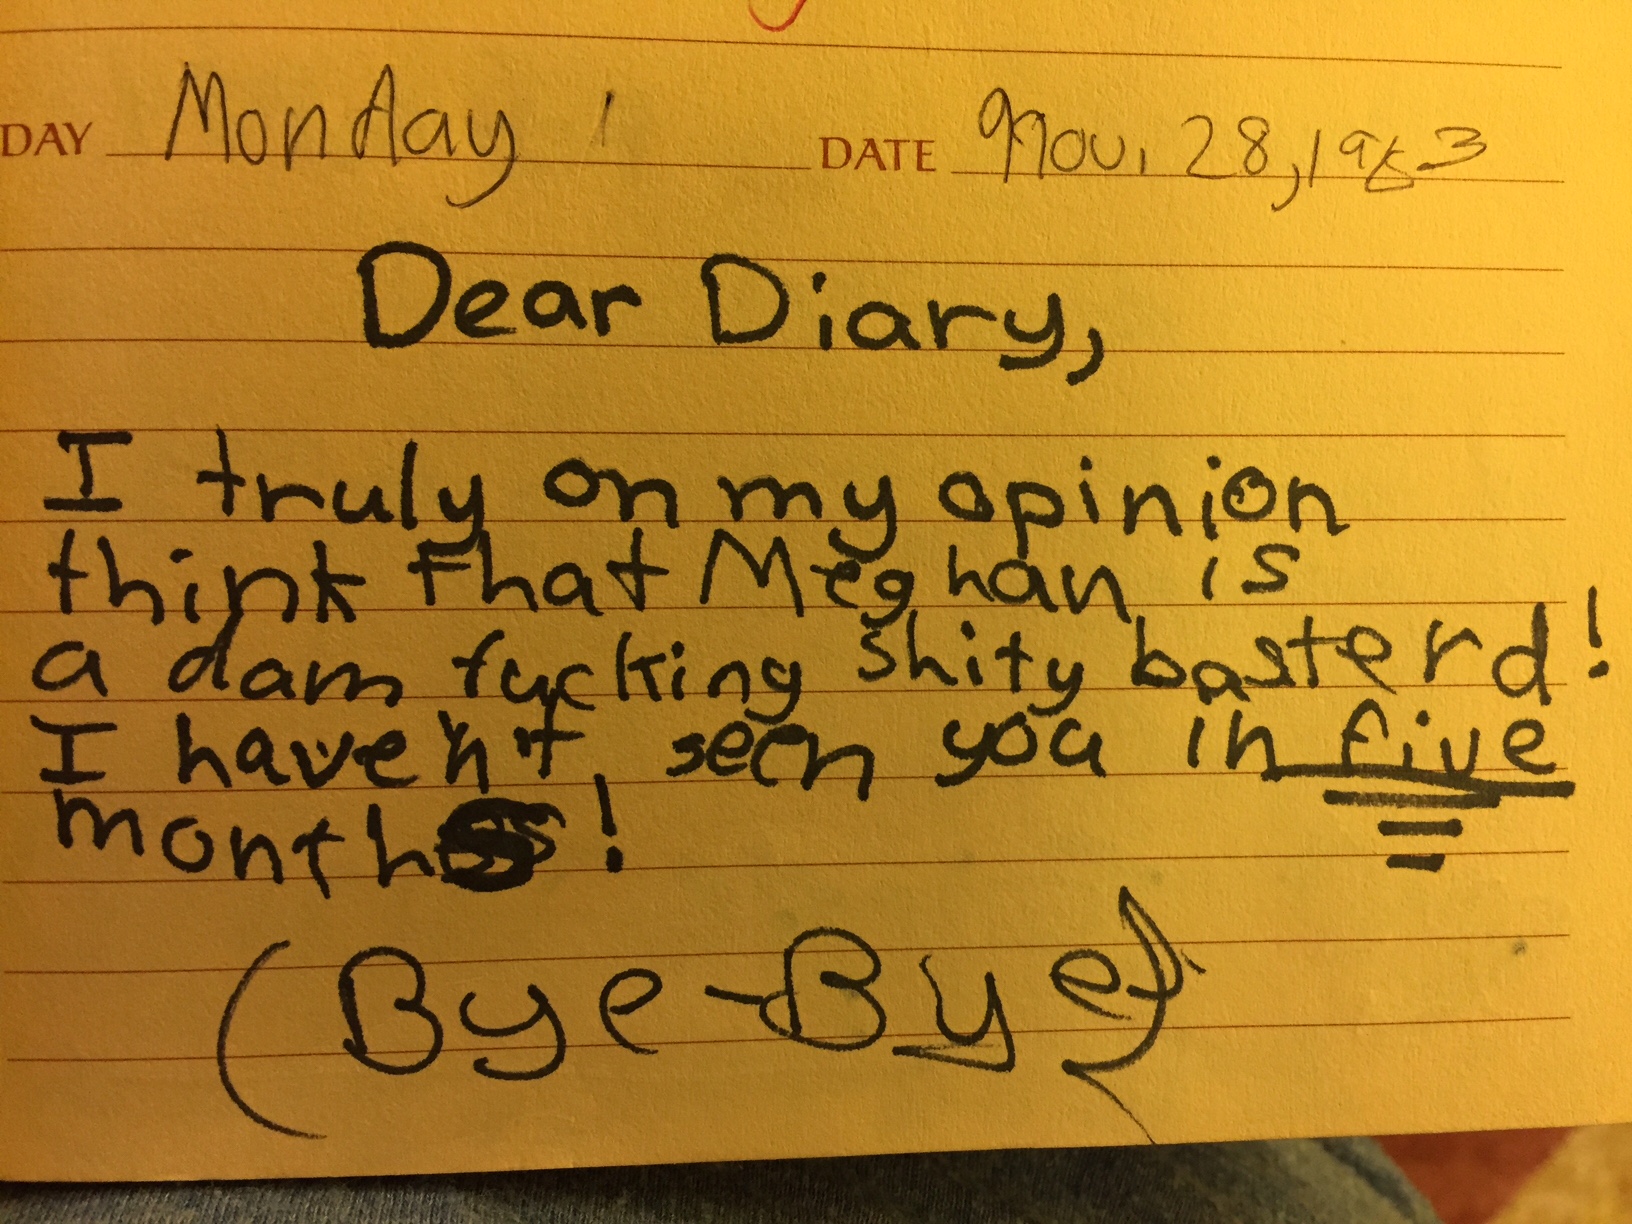 courtney's incredible diary